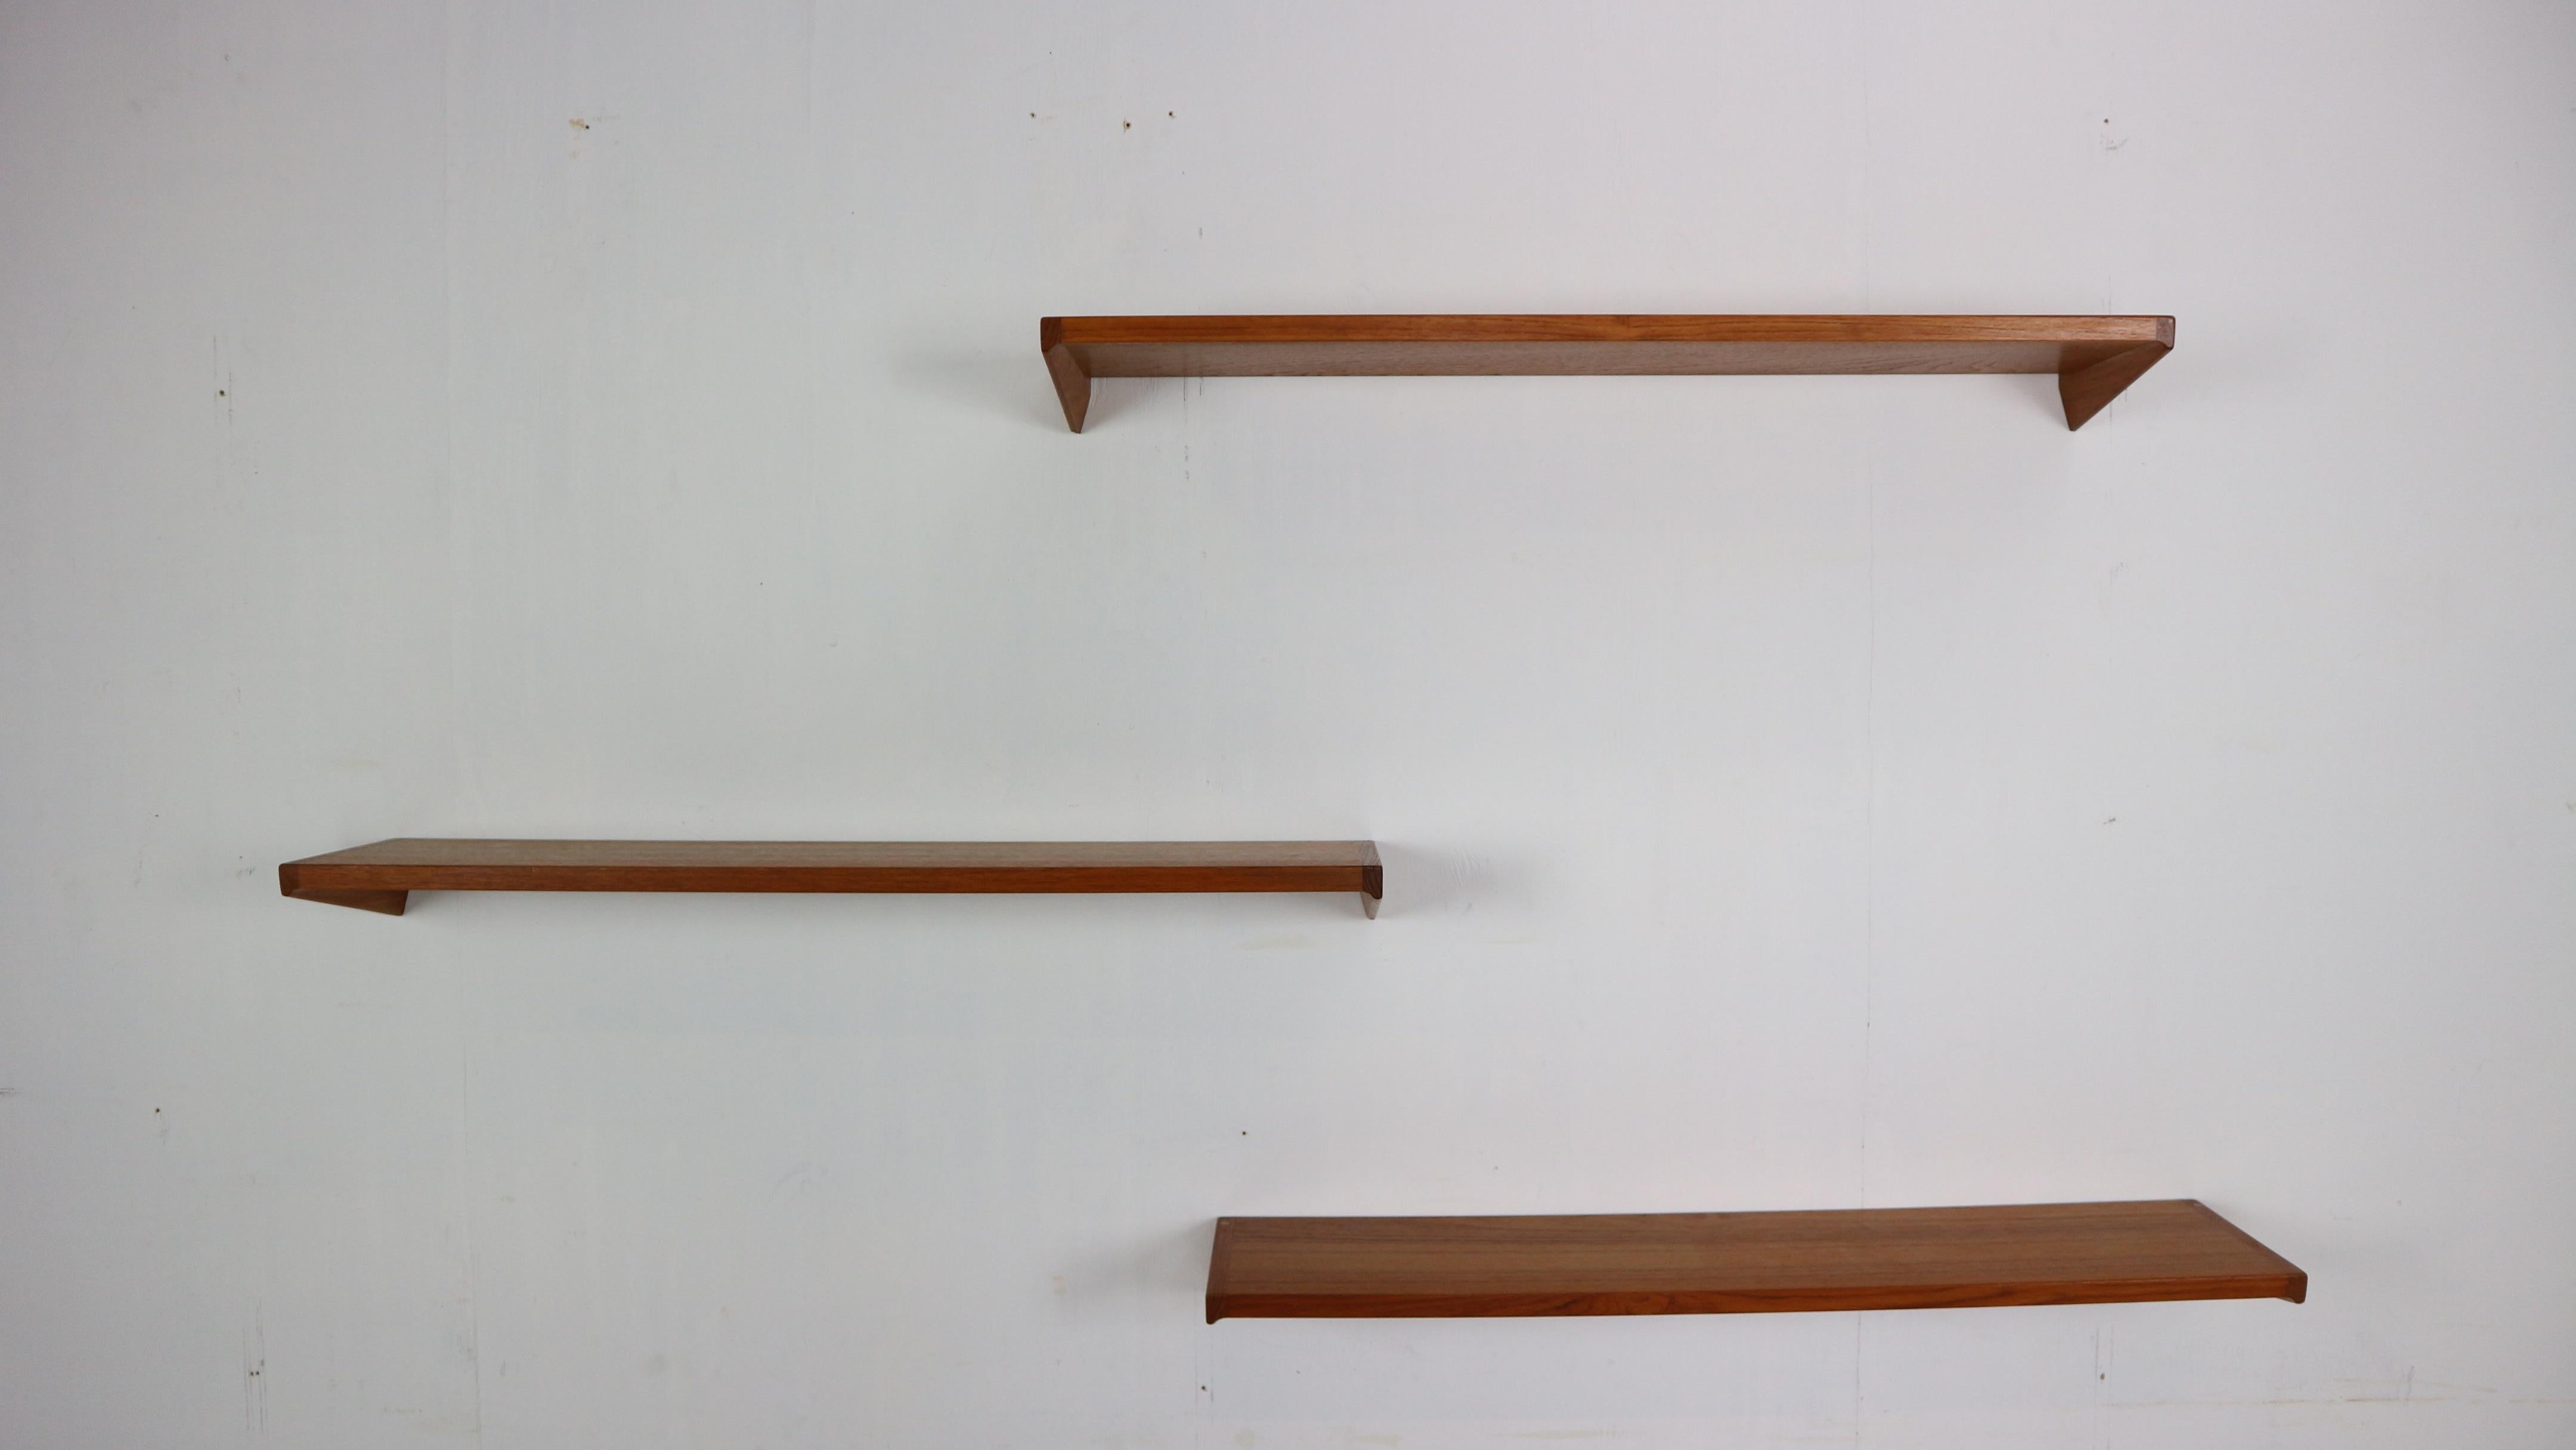 Mid- Century modern period set of 3 floating wall shelfs designed by Kai Kristiansen for the Danish publisher Feldalles Møbler in the 1960s. 
This designer is a major figure in 20th century Scandinavian designs.

The shelves are made of teak wood